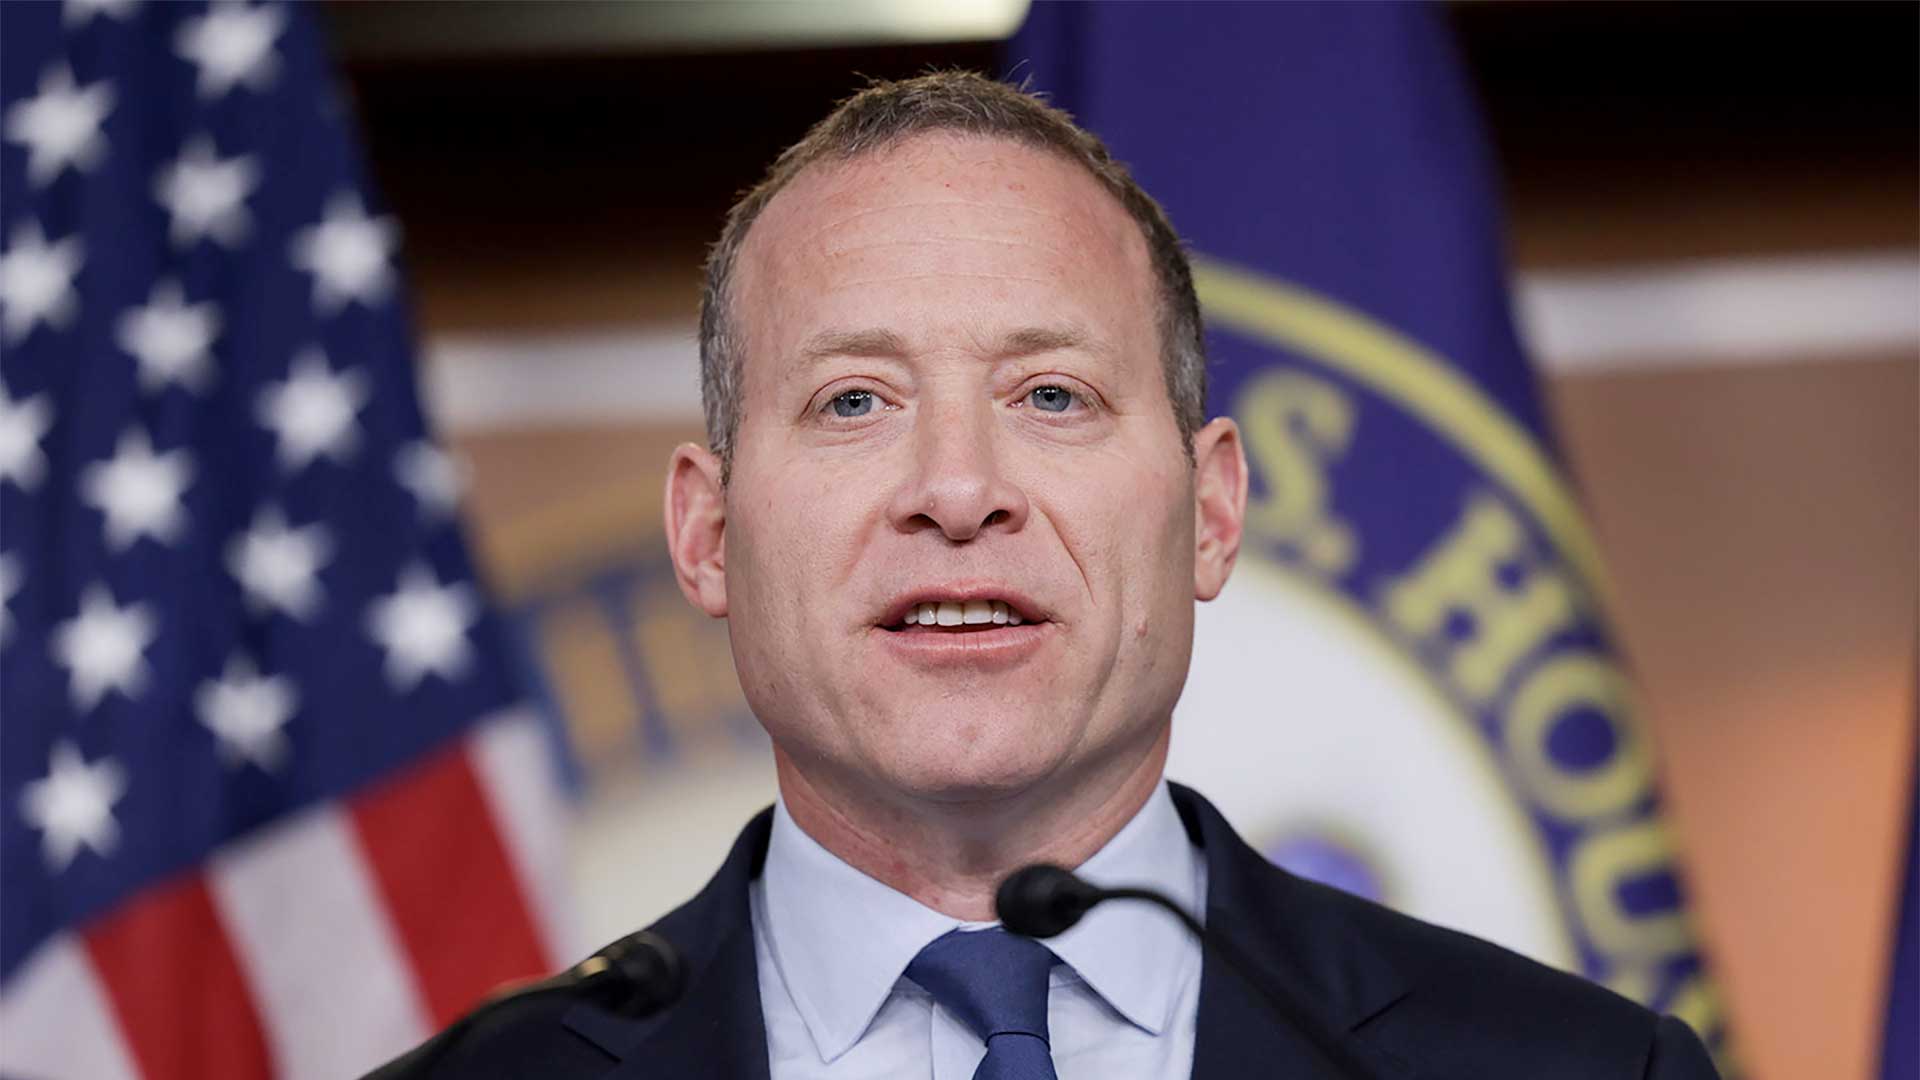 U.S. Rep. Josh Gottheimer (D-N.J.) speaks during an April 6, 2022 press conference at the U.S. Capitol. Gottheimer is among the nearly 100 members of U.S. Congress whose ownership or trading of financial assets overlapped with their committee work. (Photo: Kevin Dietsch/Getty Images)